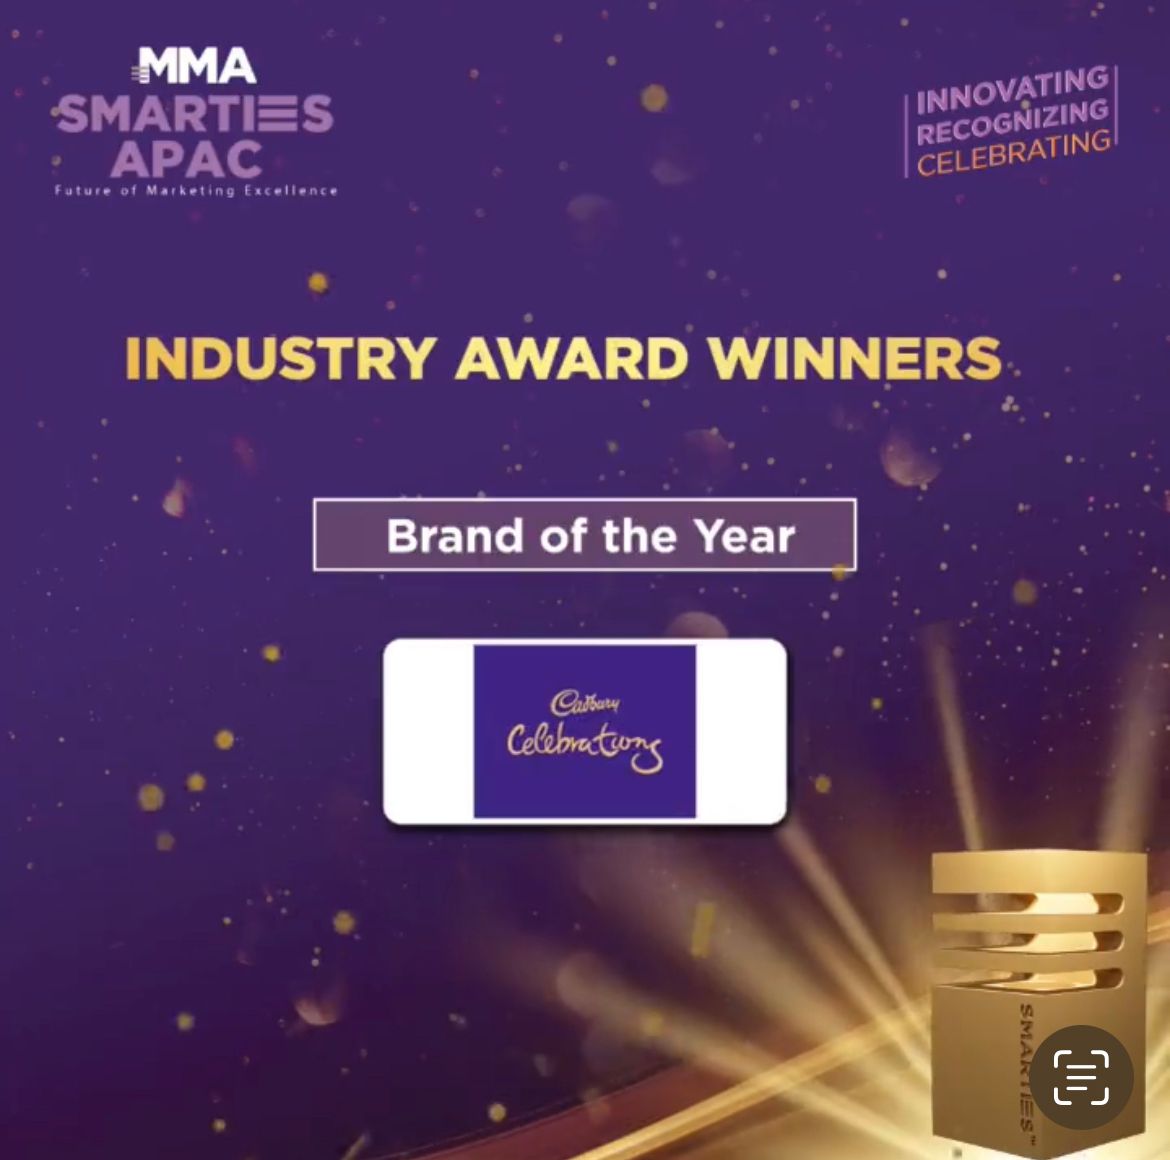 Wavemaker India and @MDLZ wins big at @MMA_APAC 's Smarties APAC!!
It's a double celebration for us as @CadburyCelebrations wins Brand of the year and Mondelēz International wins Advertiser of the year 🏆🏆🏆
Grateful to all our clients, creative agency partners and our teams 🙌